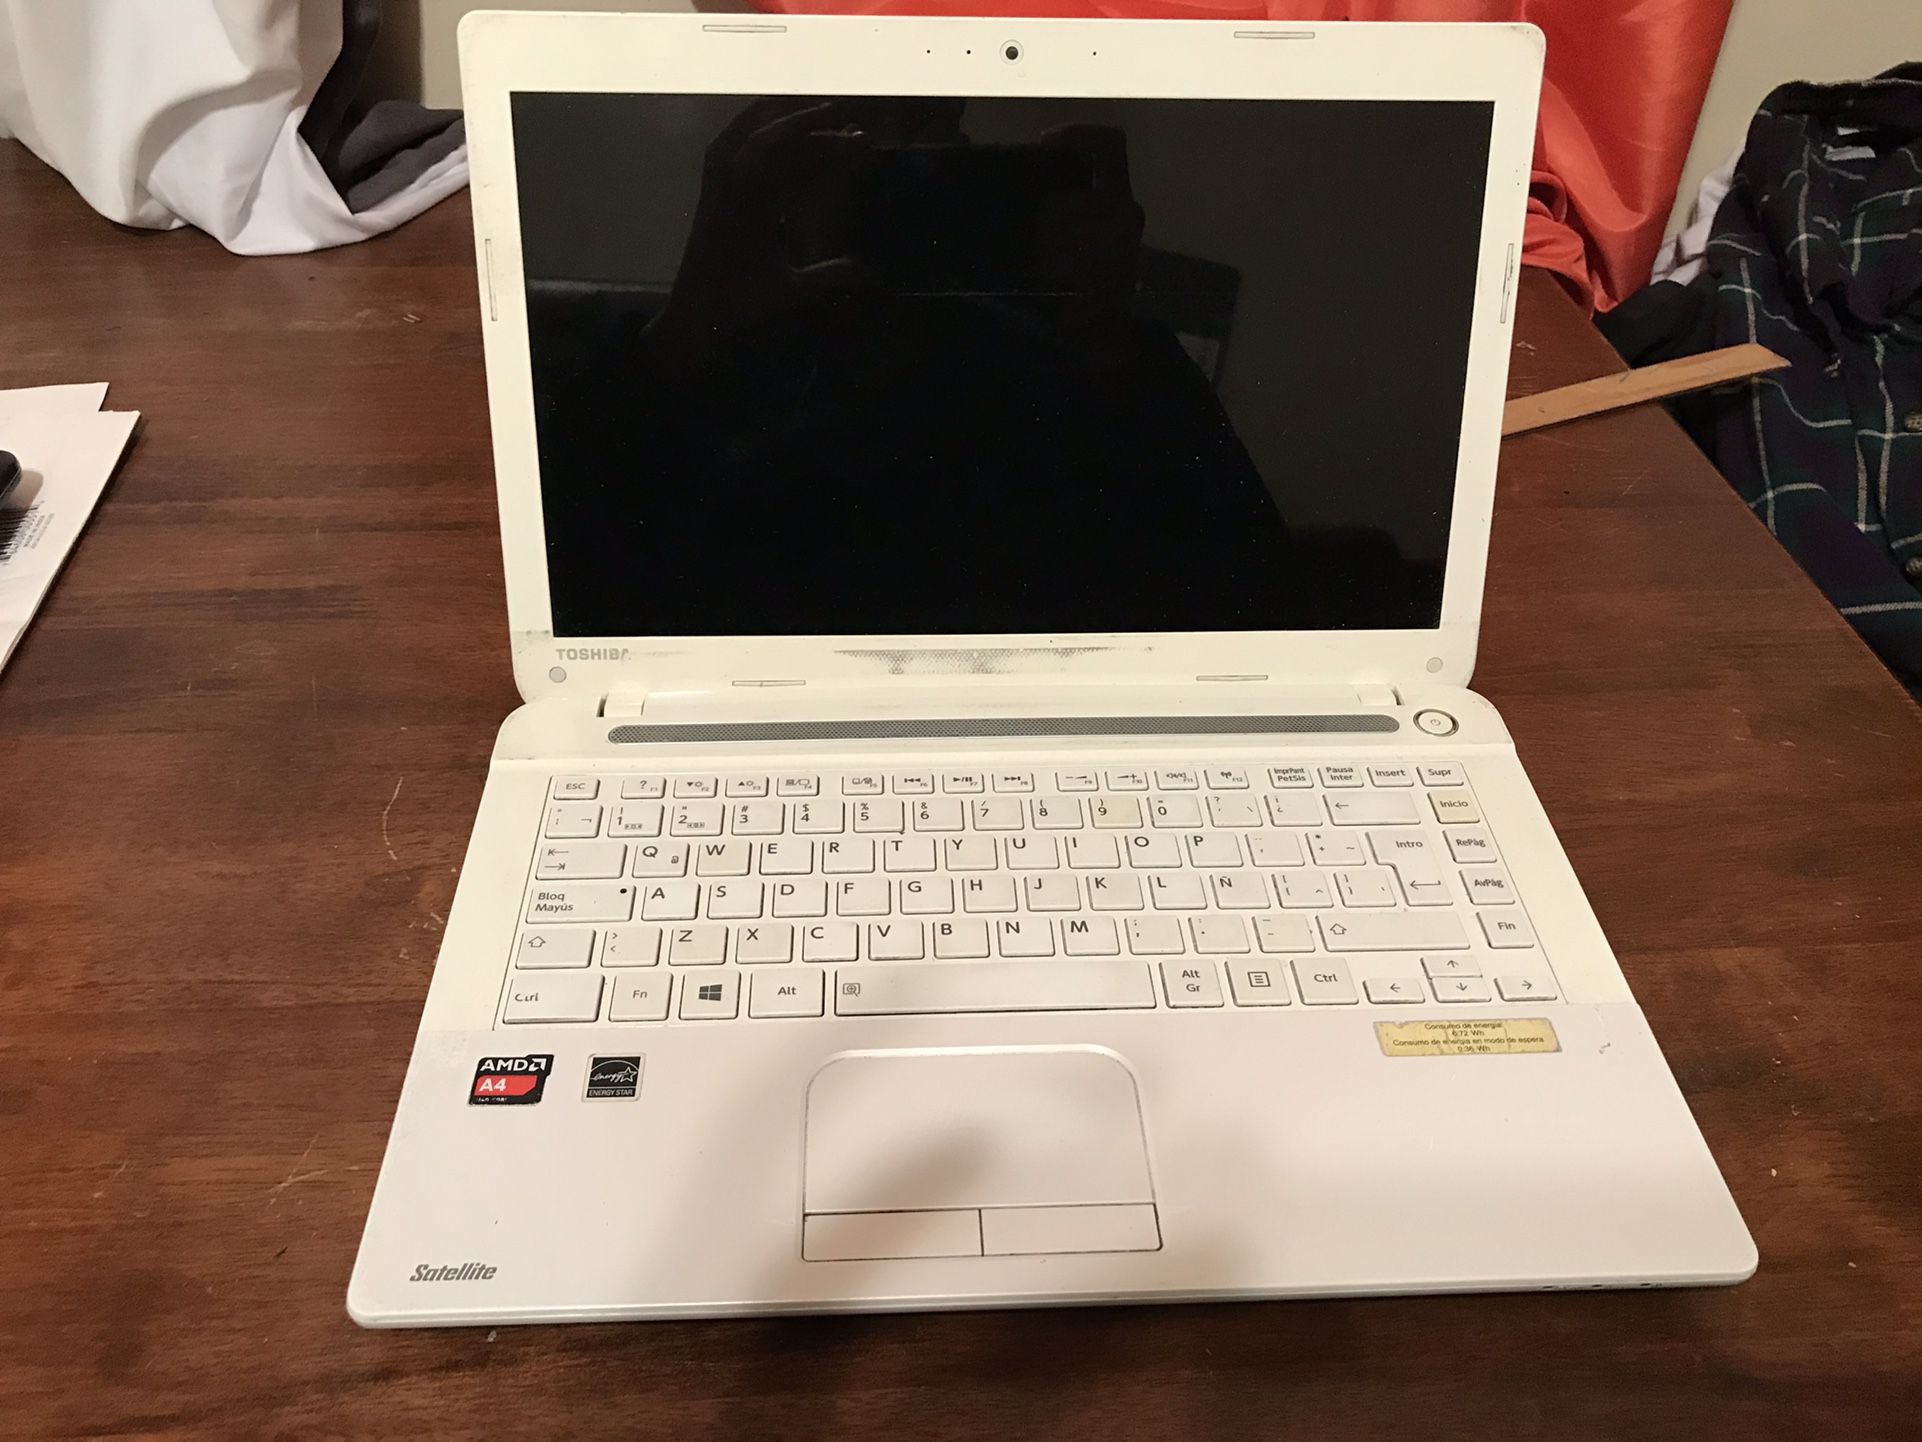 Toshiba Laptop (( Works And Holds Charge)) With Charger